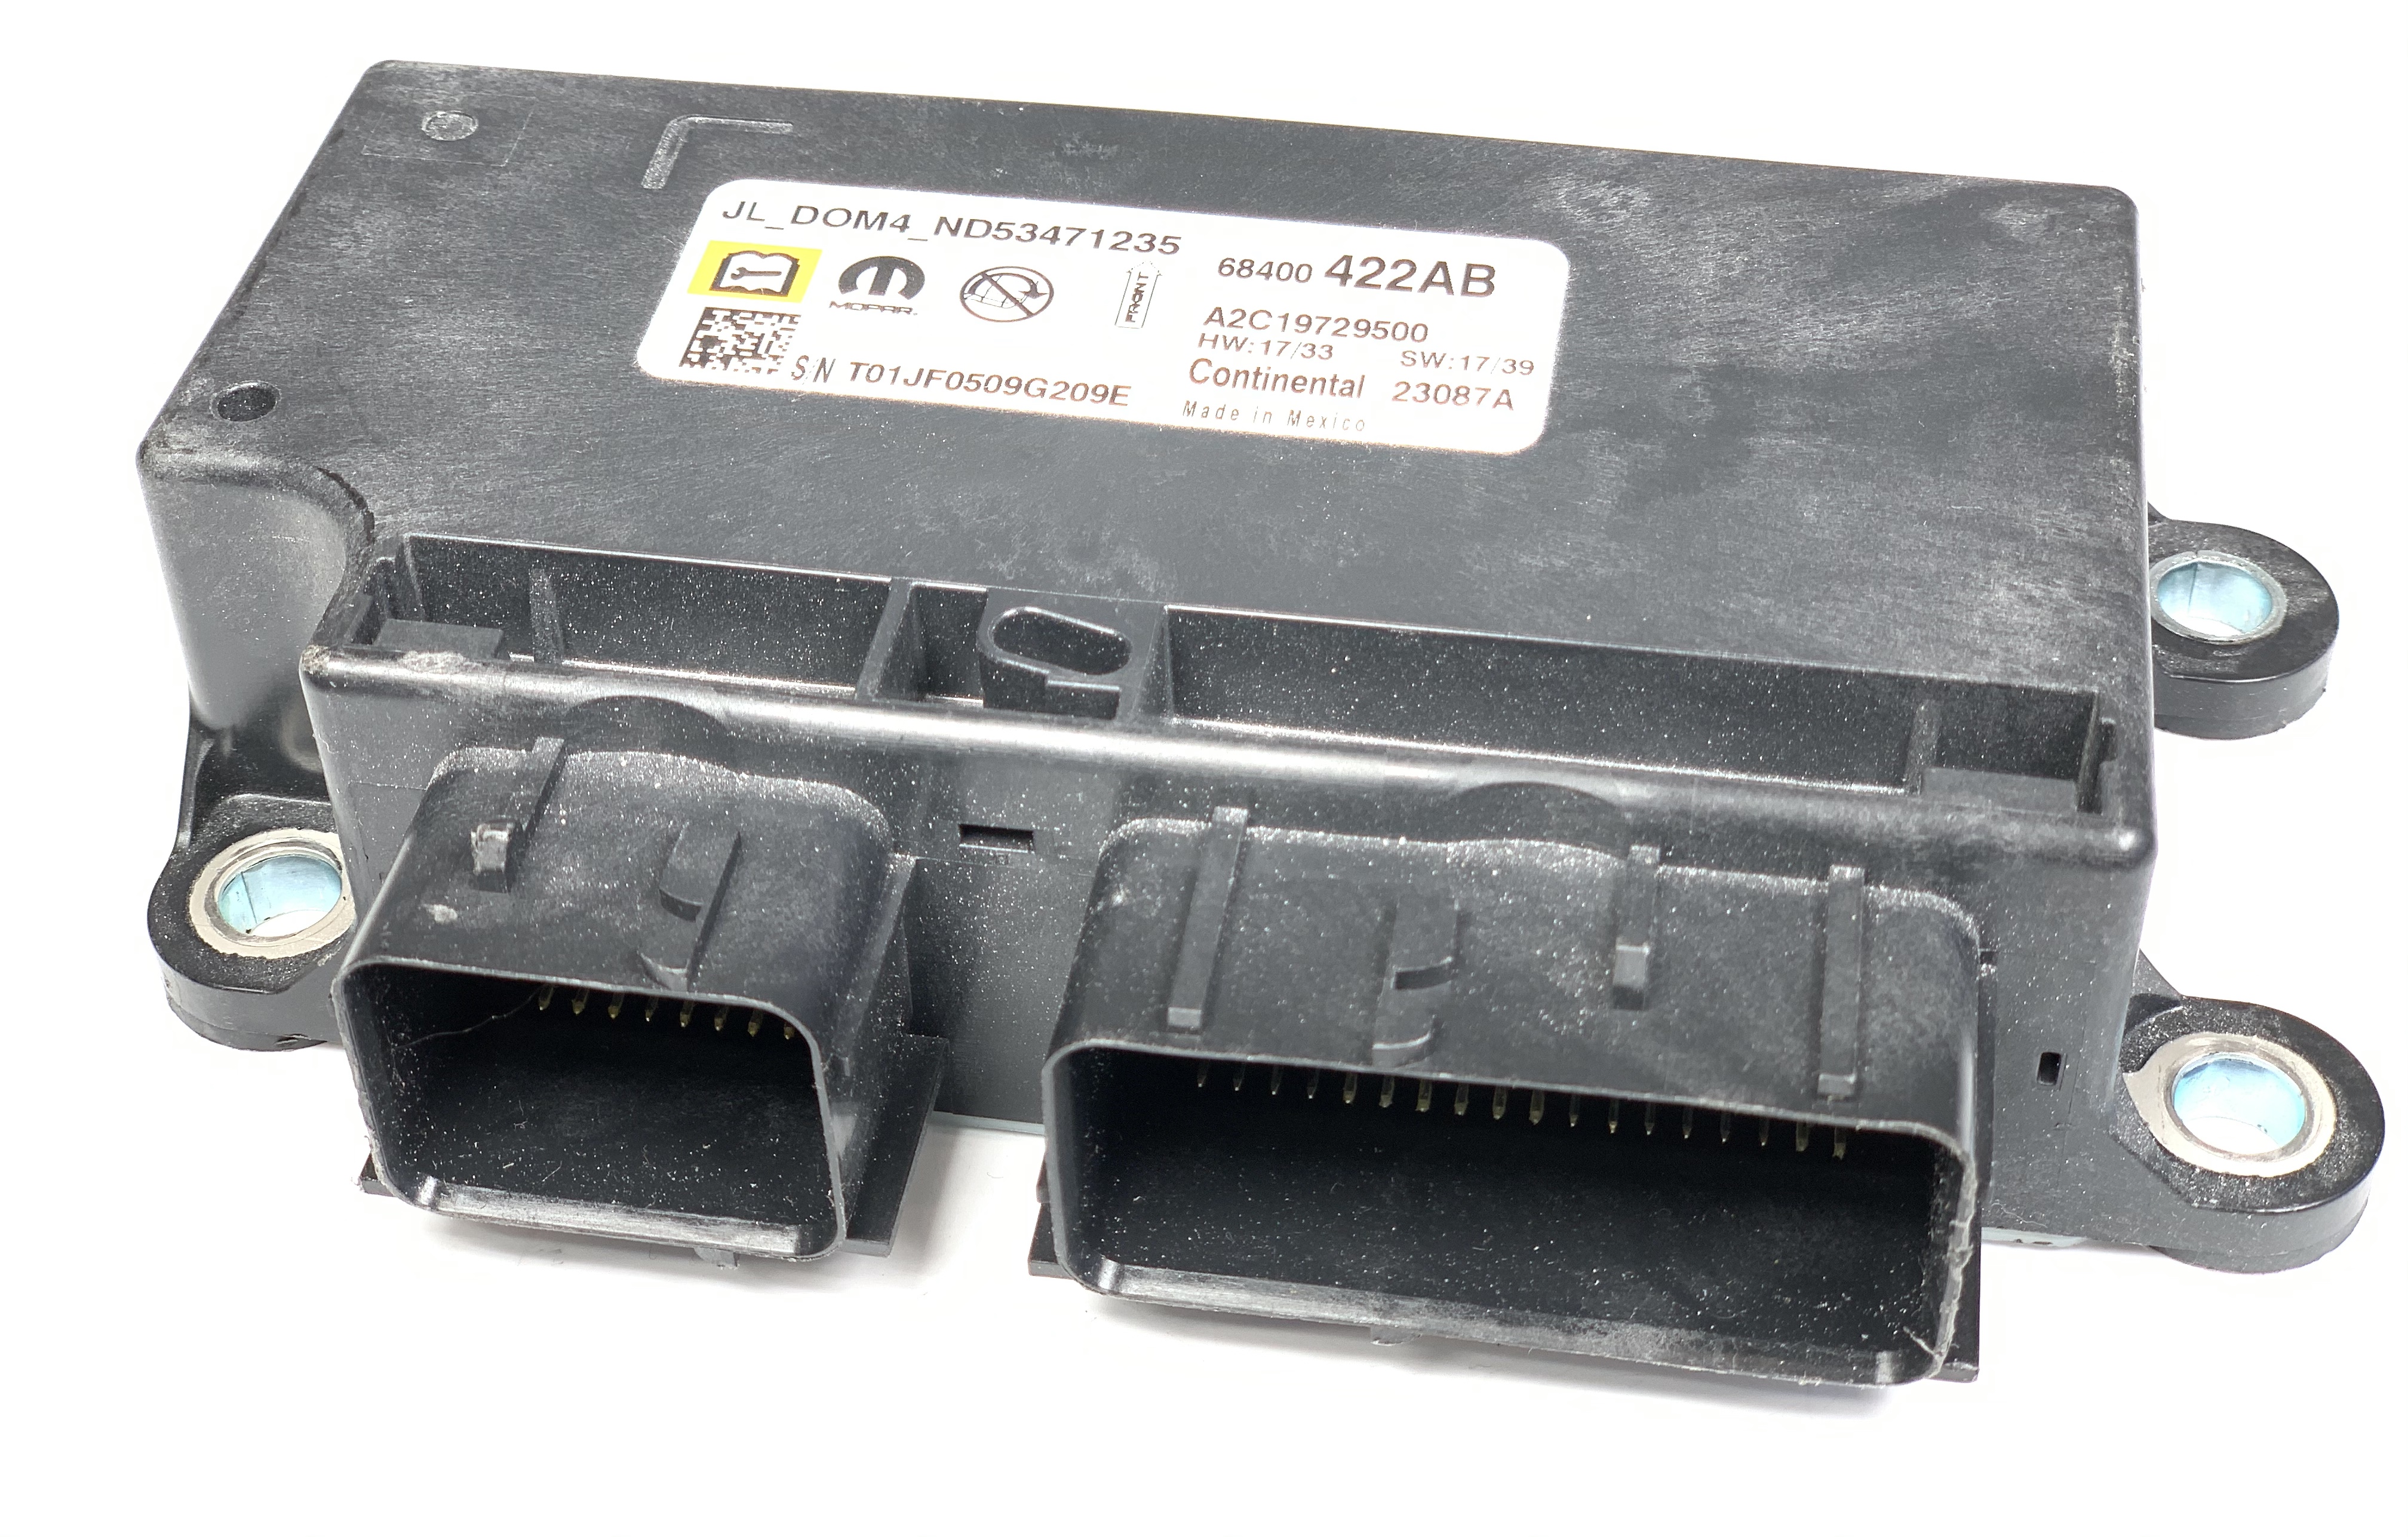 JEEP WRANGLER SRS ORC ORM Occupant Control Module - Airbag Computer Control Module PART #68400422AB